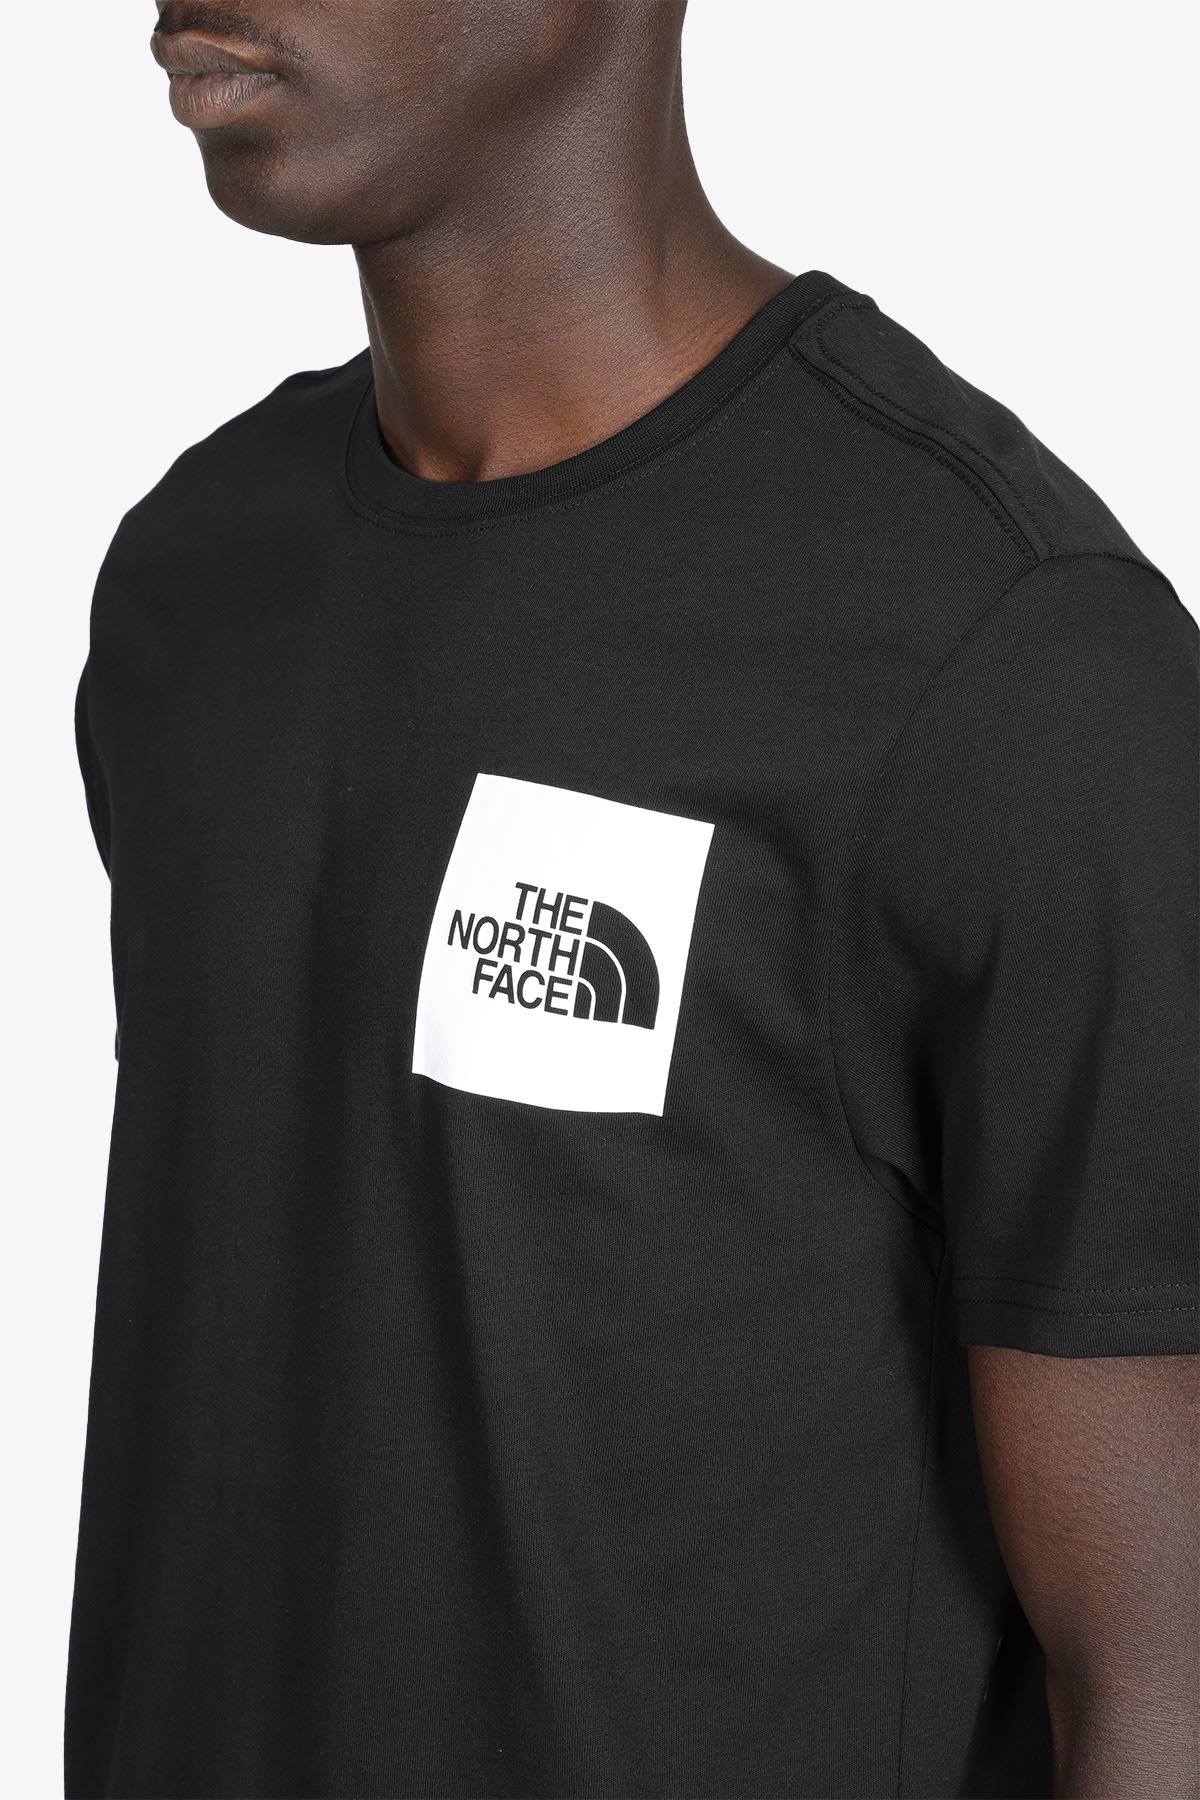 The North Face M S/s Fine Tee Black cotton t-shirt with chest logo